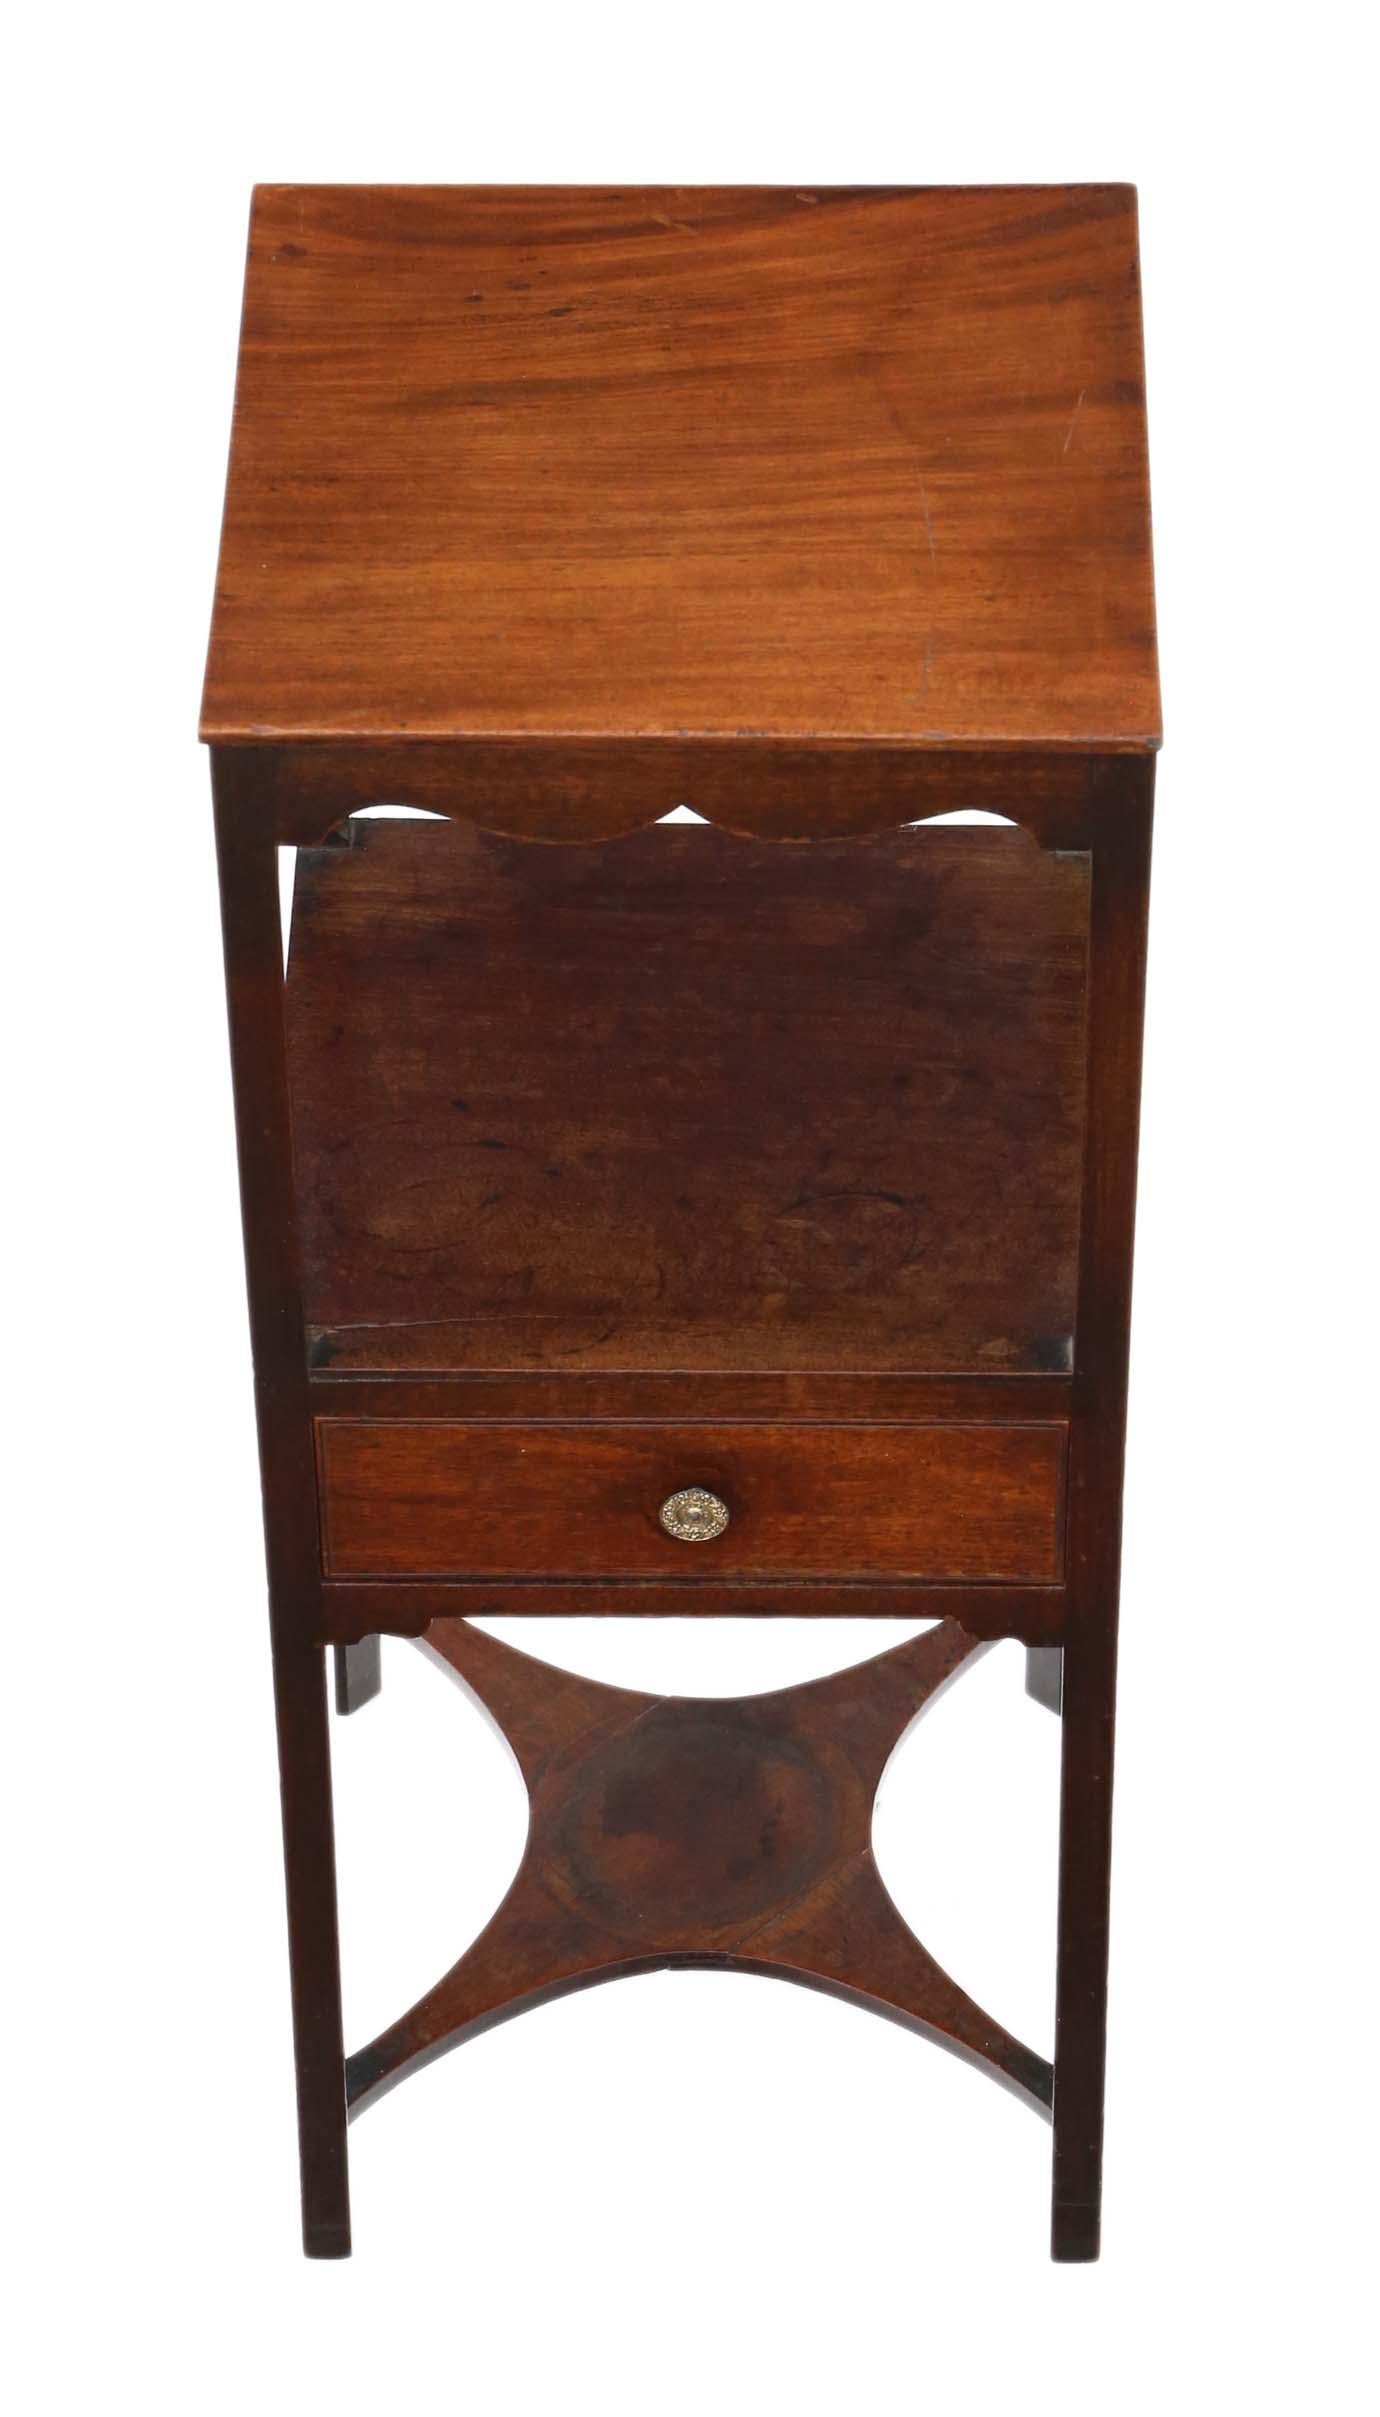 Antique quality Georgian circa 1800 mahogany washstand bedside table.
Great rare item, which is solid with no loose joints and no woodworm. The oak lined drawer slides freely.
Lovely age, color and patina.
Measures: 33cm wide x 33cm deep x 82cm